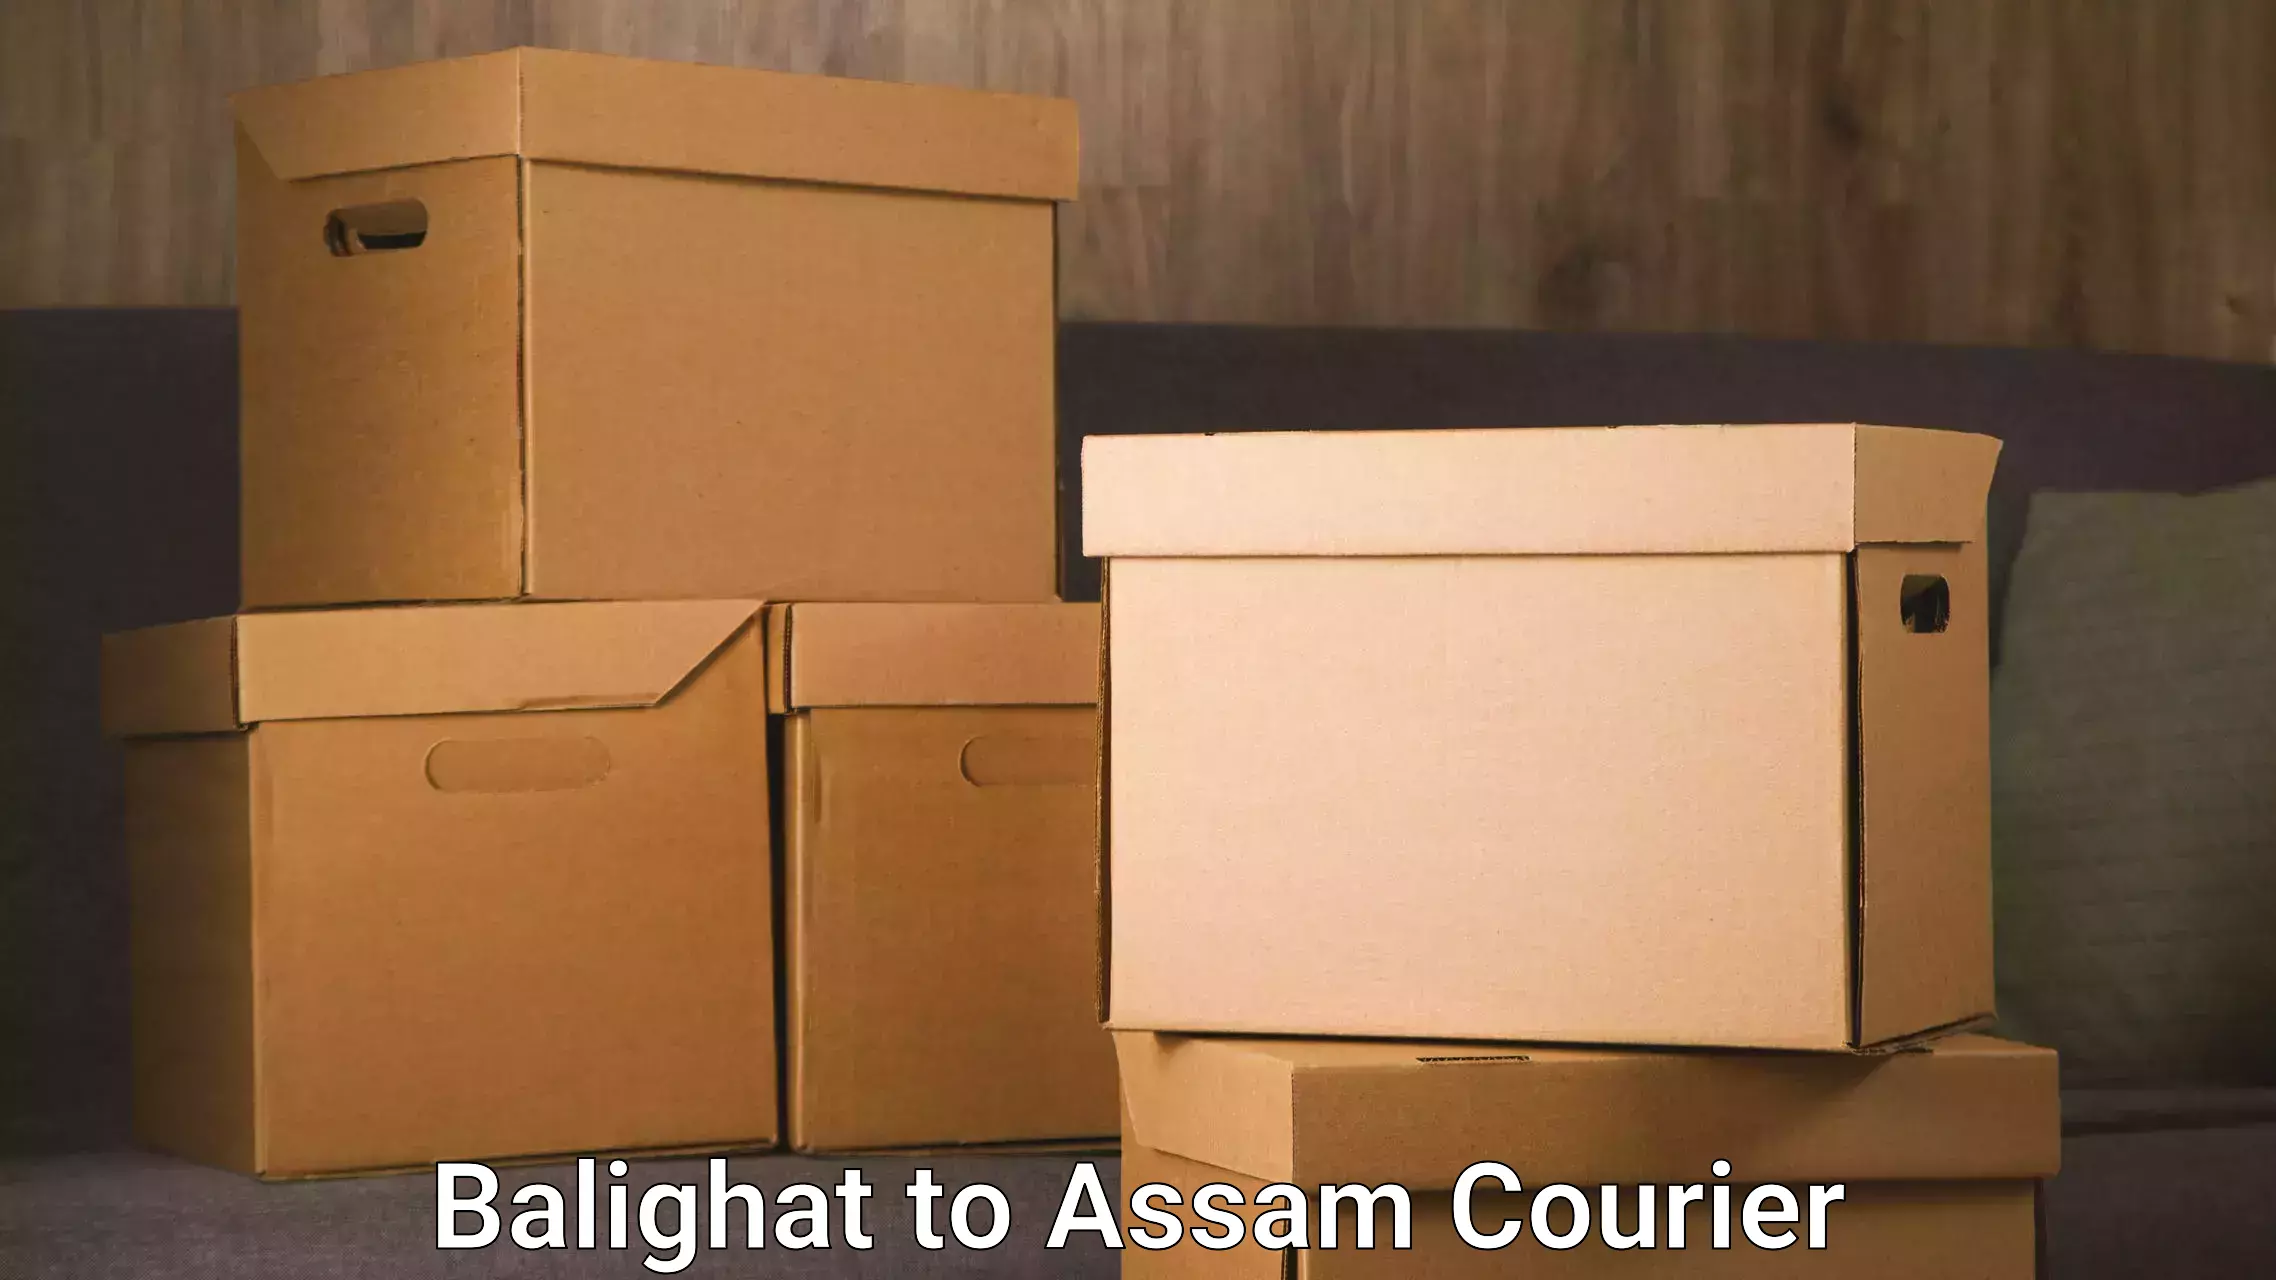 End-to-end delivery Balighat to Assam